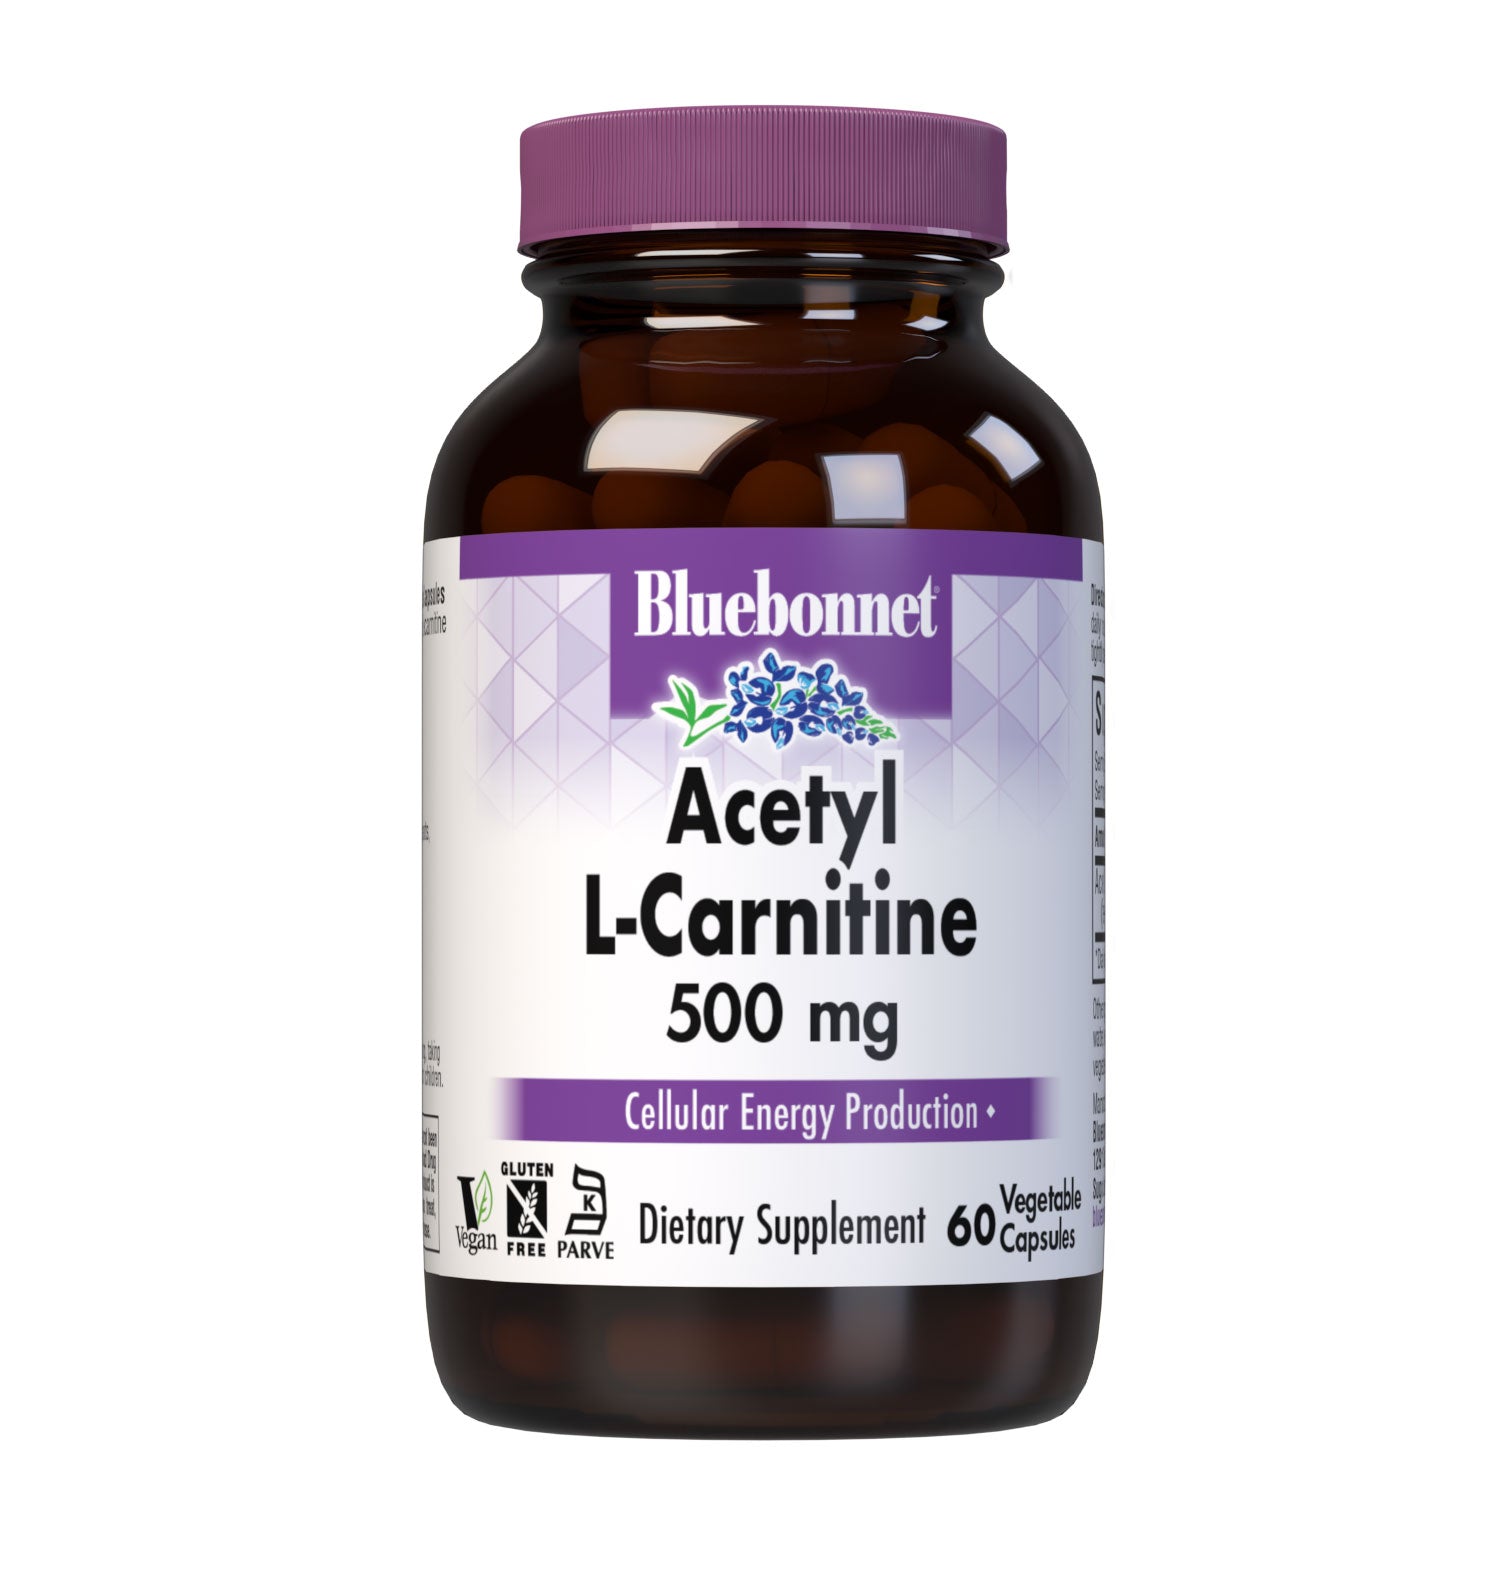 Bluebonnet’s Acetyl L-Carnitine 500 mg 60 Vegetable Capsules are formulated with the free-form amino acid acetyl L-carnitine HCI in its crystalline form which may support cellular energy production. #size_60 count